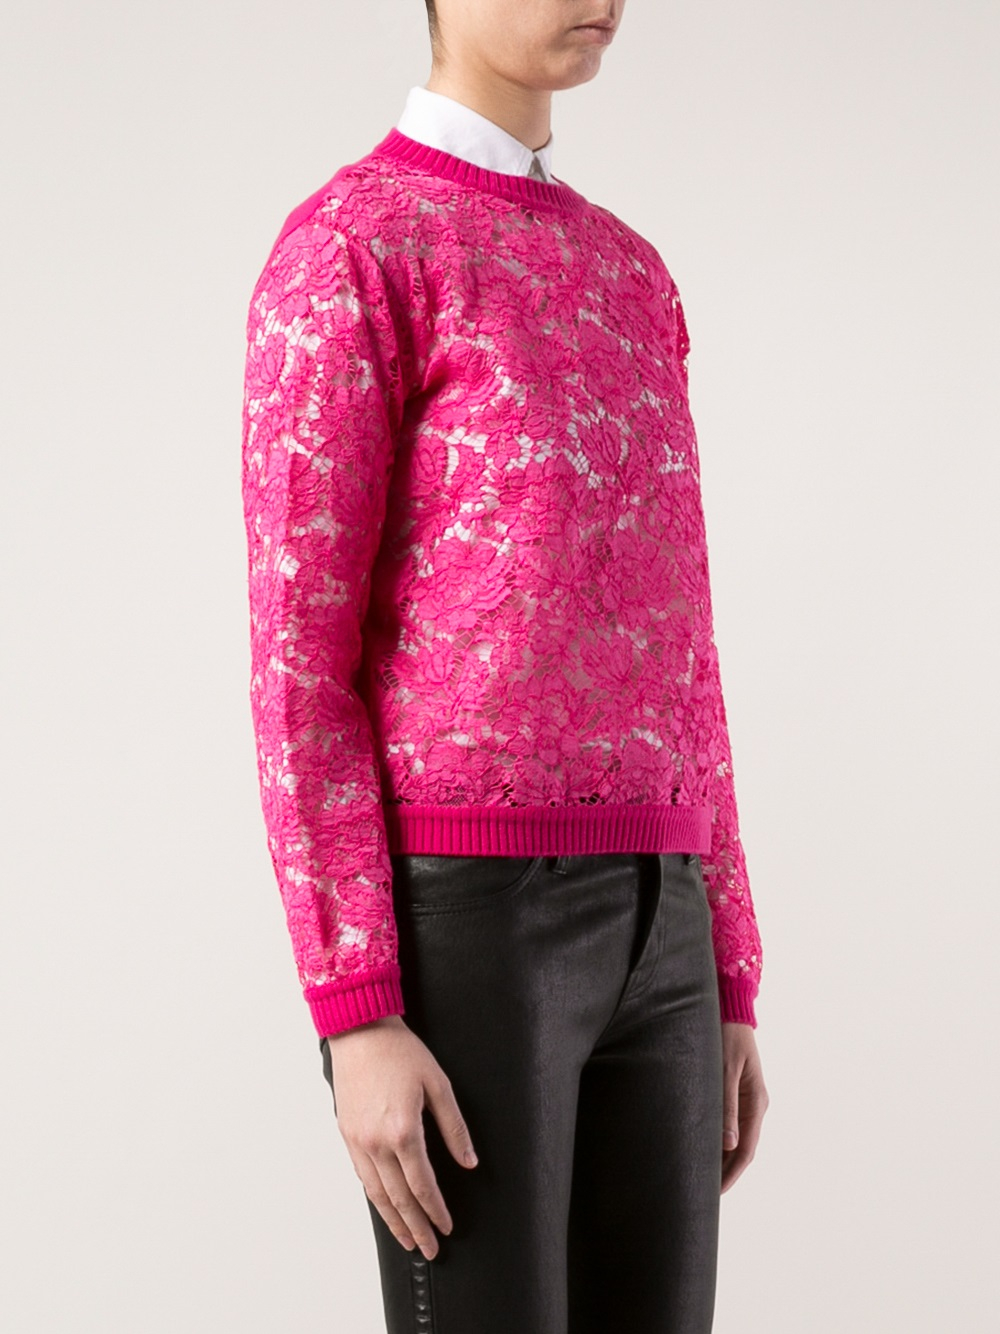 Valentino Front Lace Sweater in Pink & Purple (Pink) - Lyst